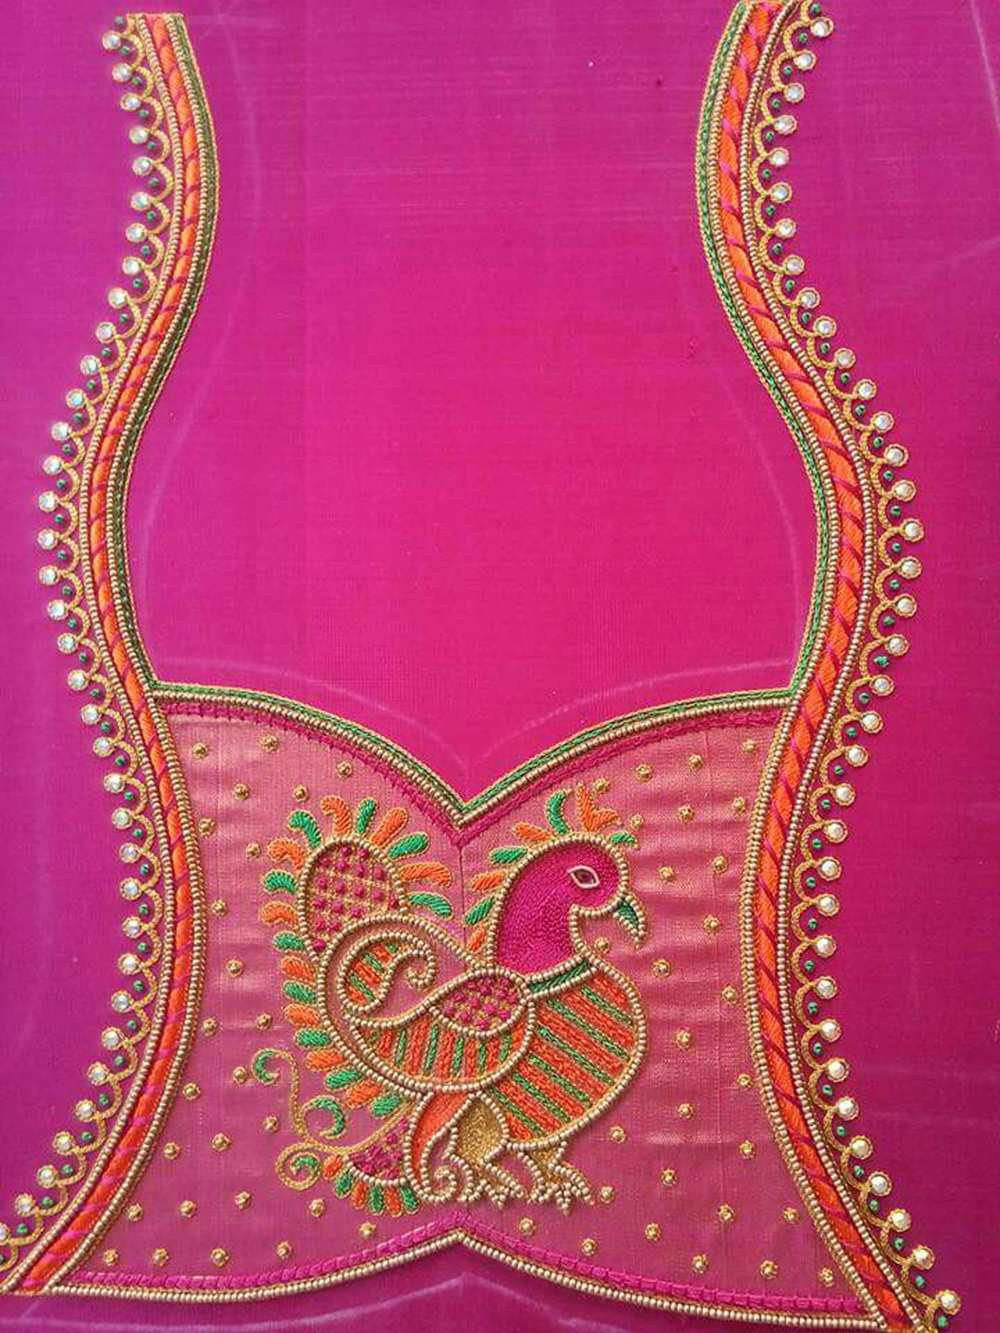 Stone Embroidery Patterns Rk Hand Embroidery Peacock Aari Work Blouse Neck Design Embroidery